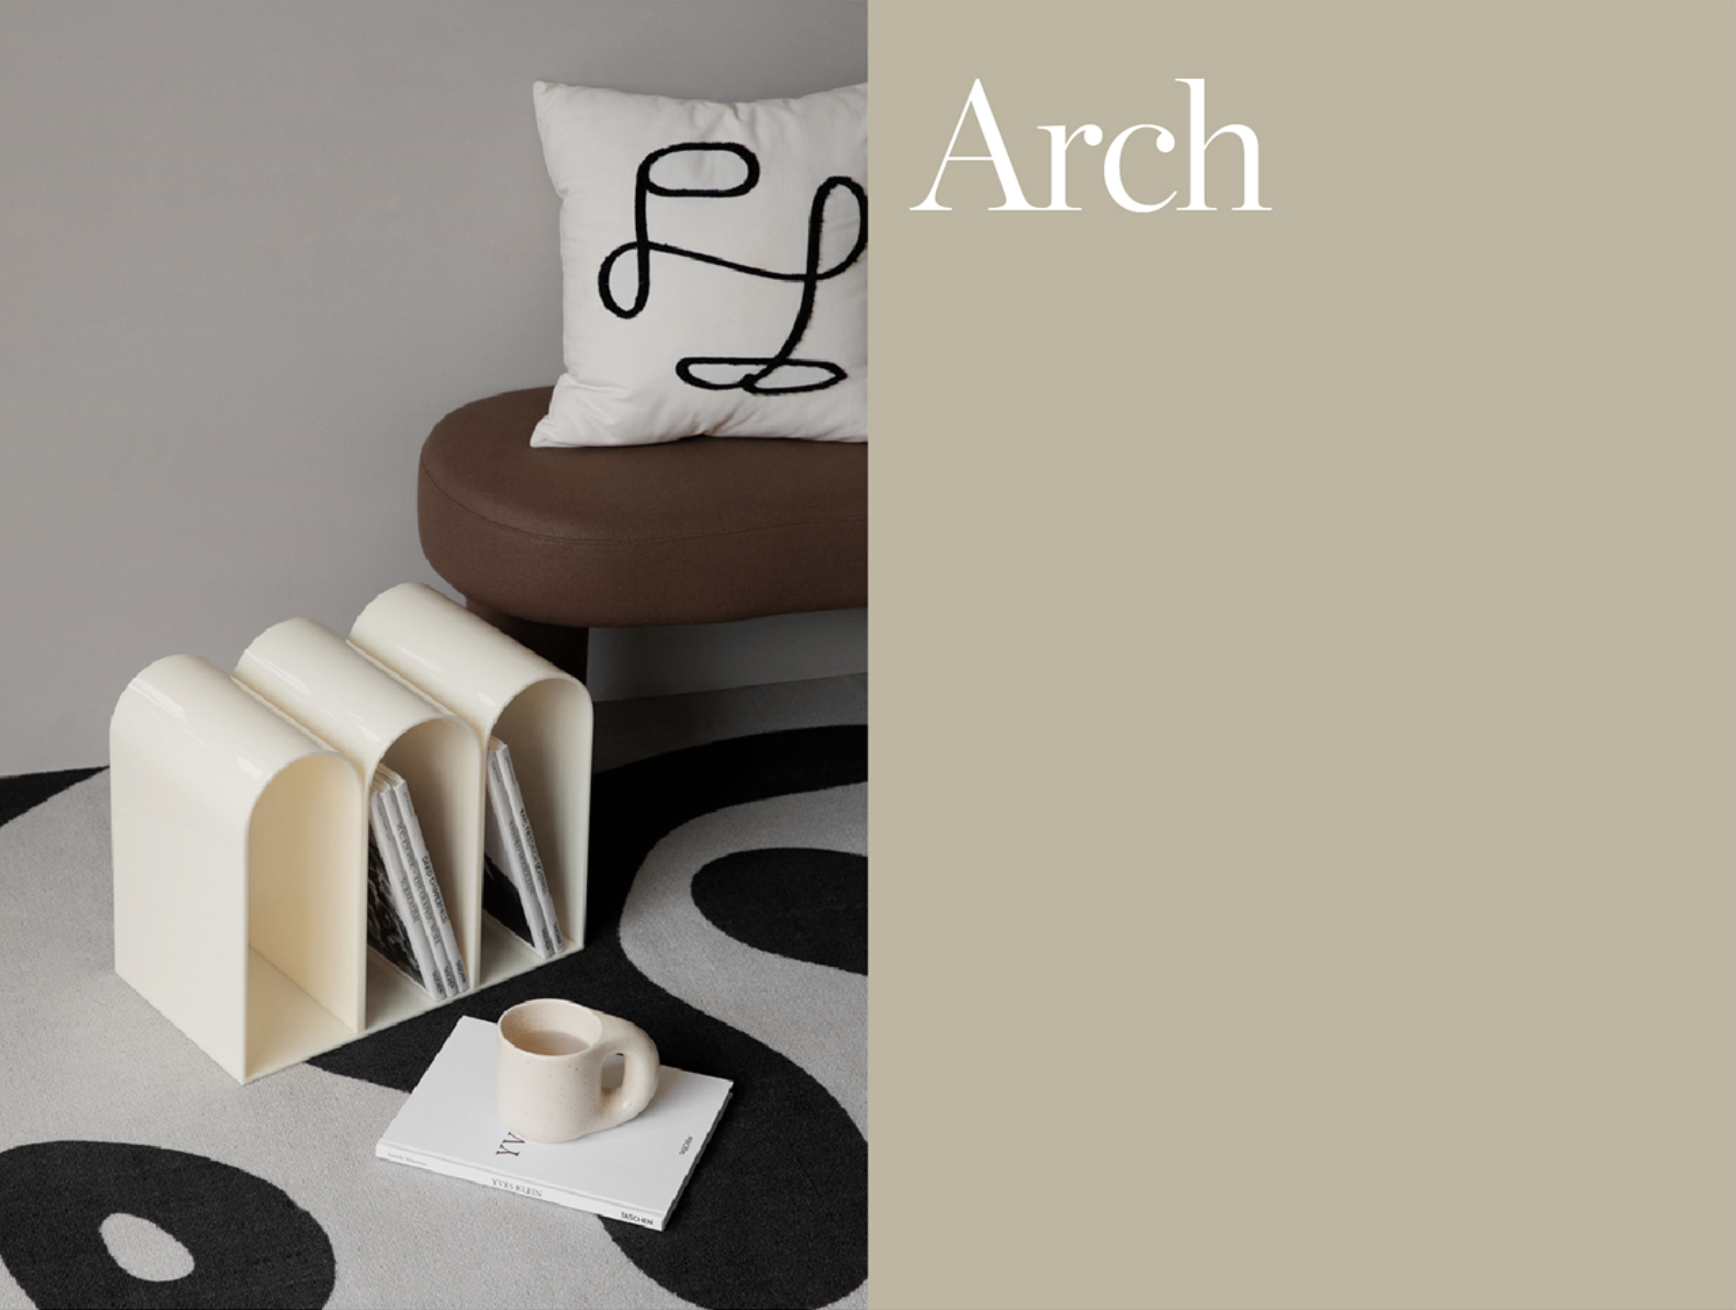 Arch style handmade cream beige magazine holder book rack aesthetic and side table, by A Bit Sleepy homeware concept store